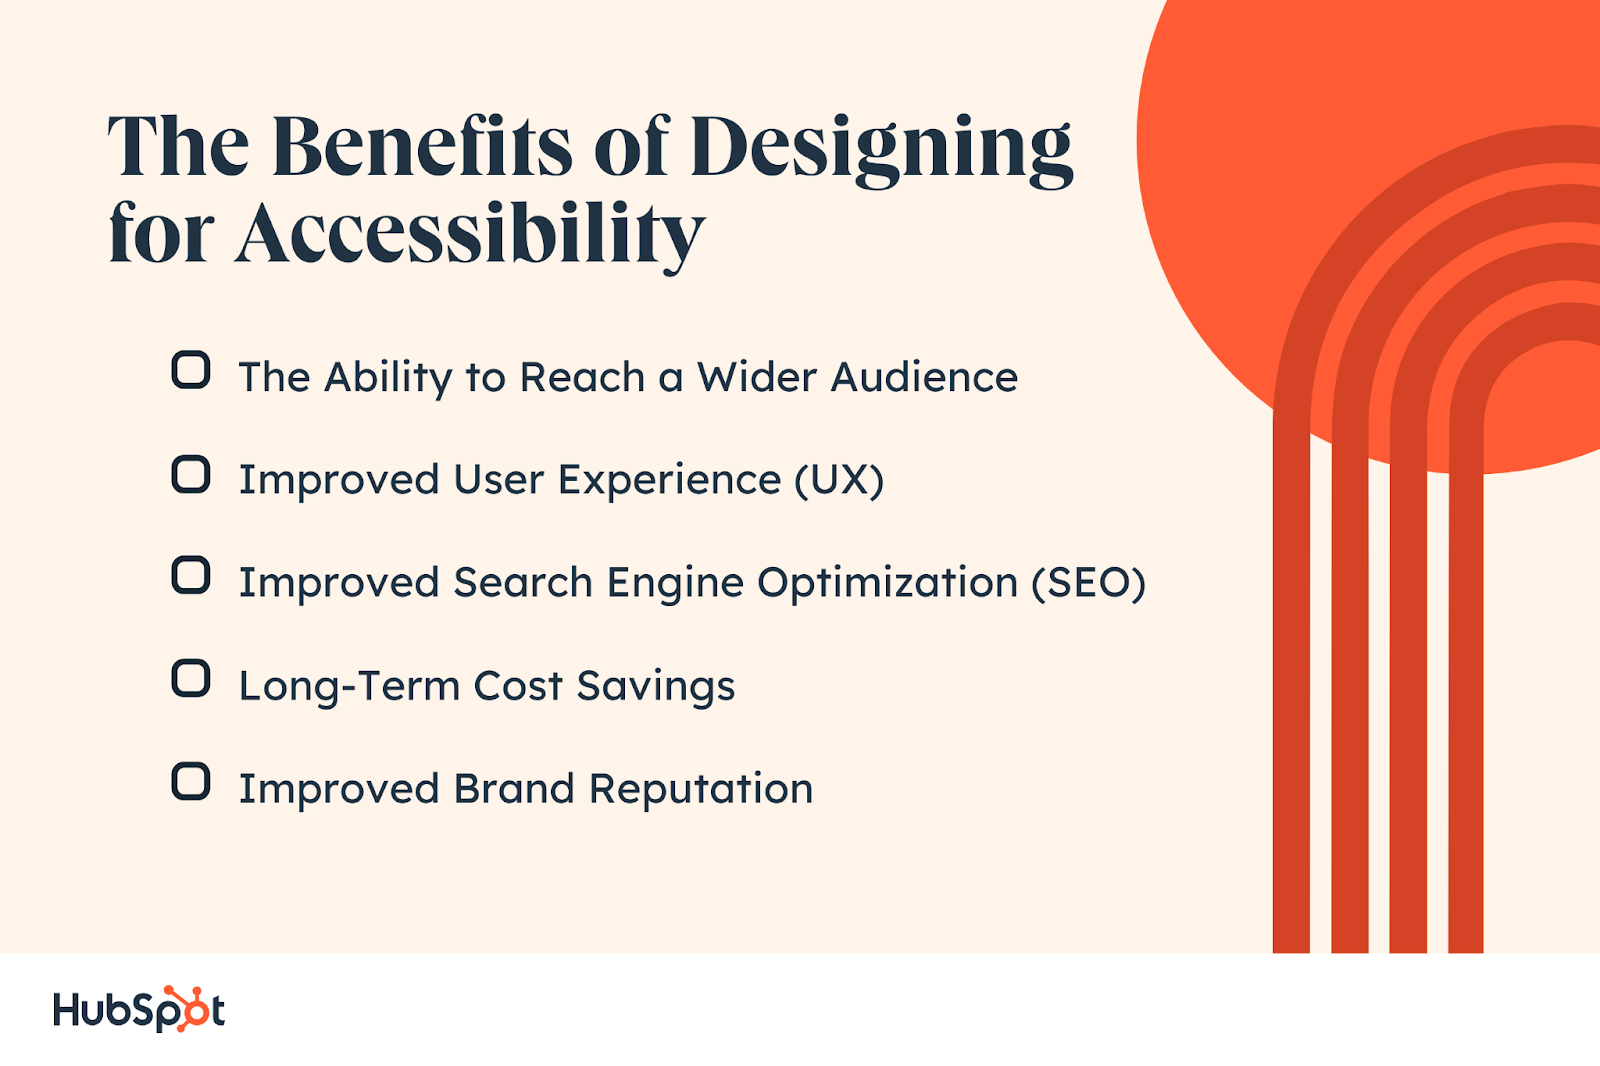 The Benefits of Designing for Accessibility. The Ability to Reach a Wider Audience. Improved User Experience (UX). Improved Search Engine Optimization (SEO). Long-Term Cost Savings. Improved Brand Reputation